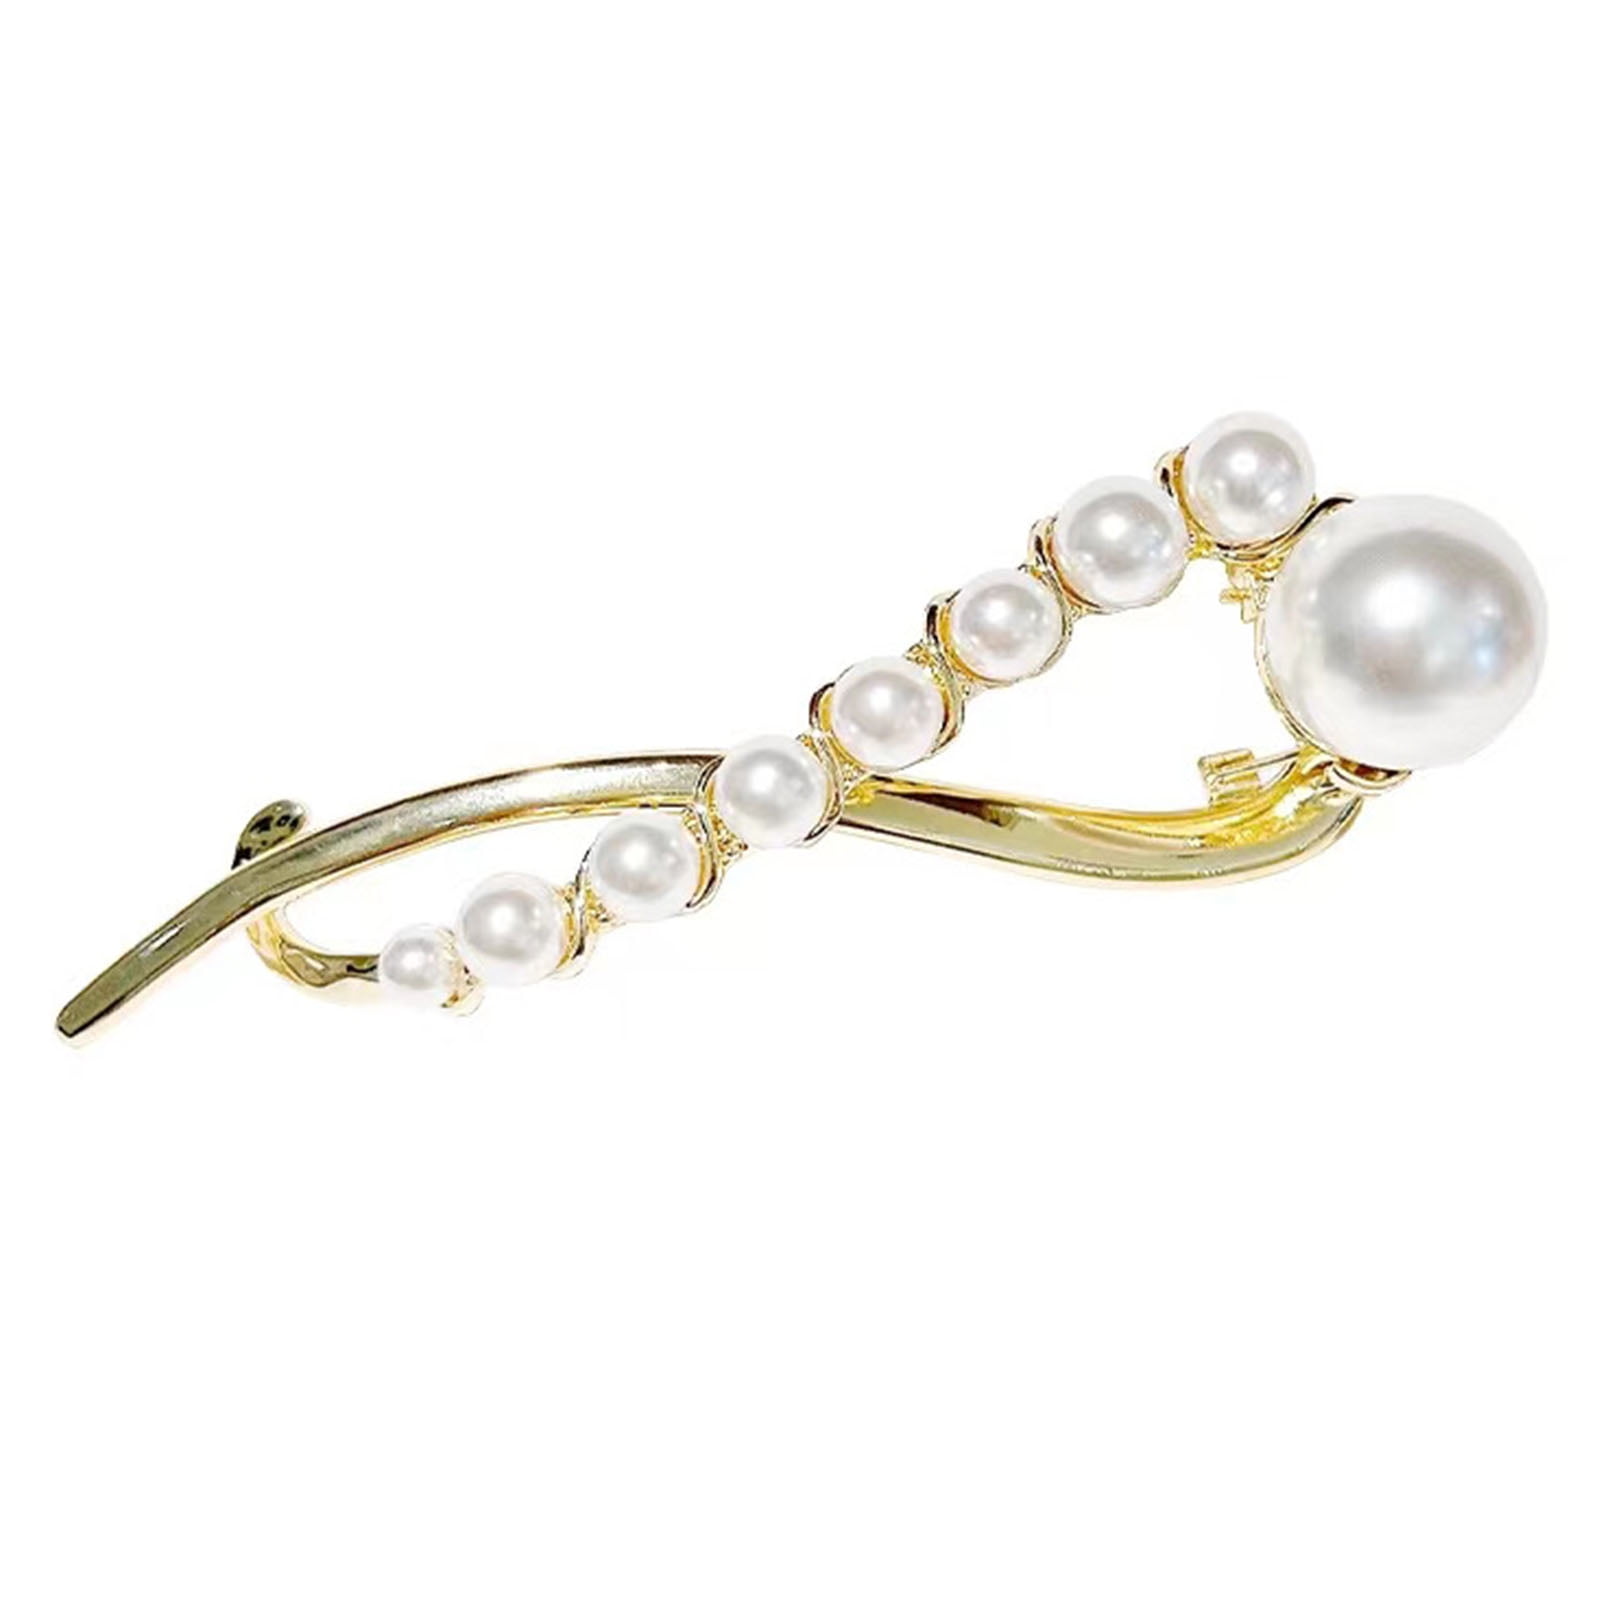 Temacd Hair Clip Golden-plated Faux Pearl Decor Electroplating S